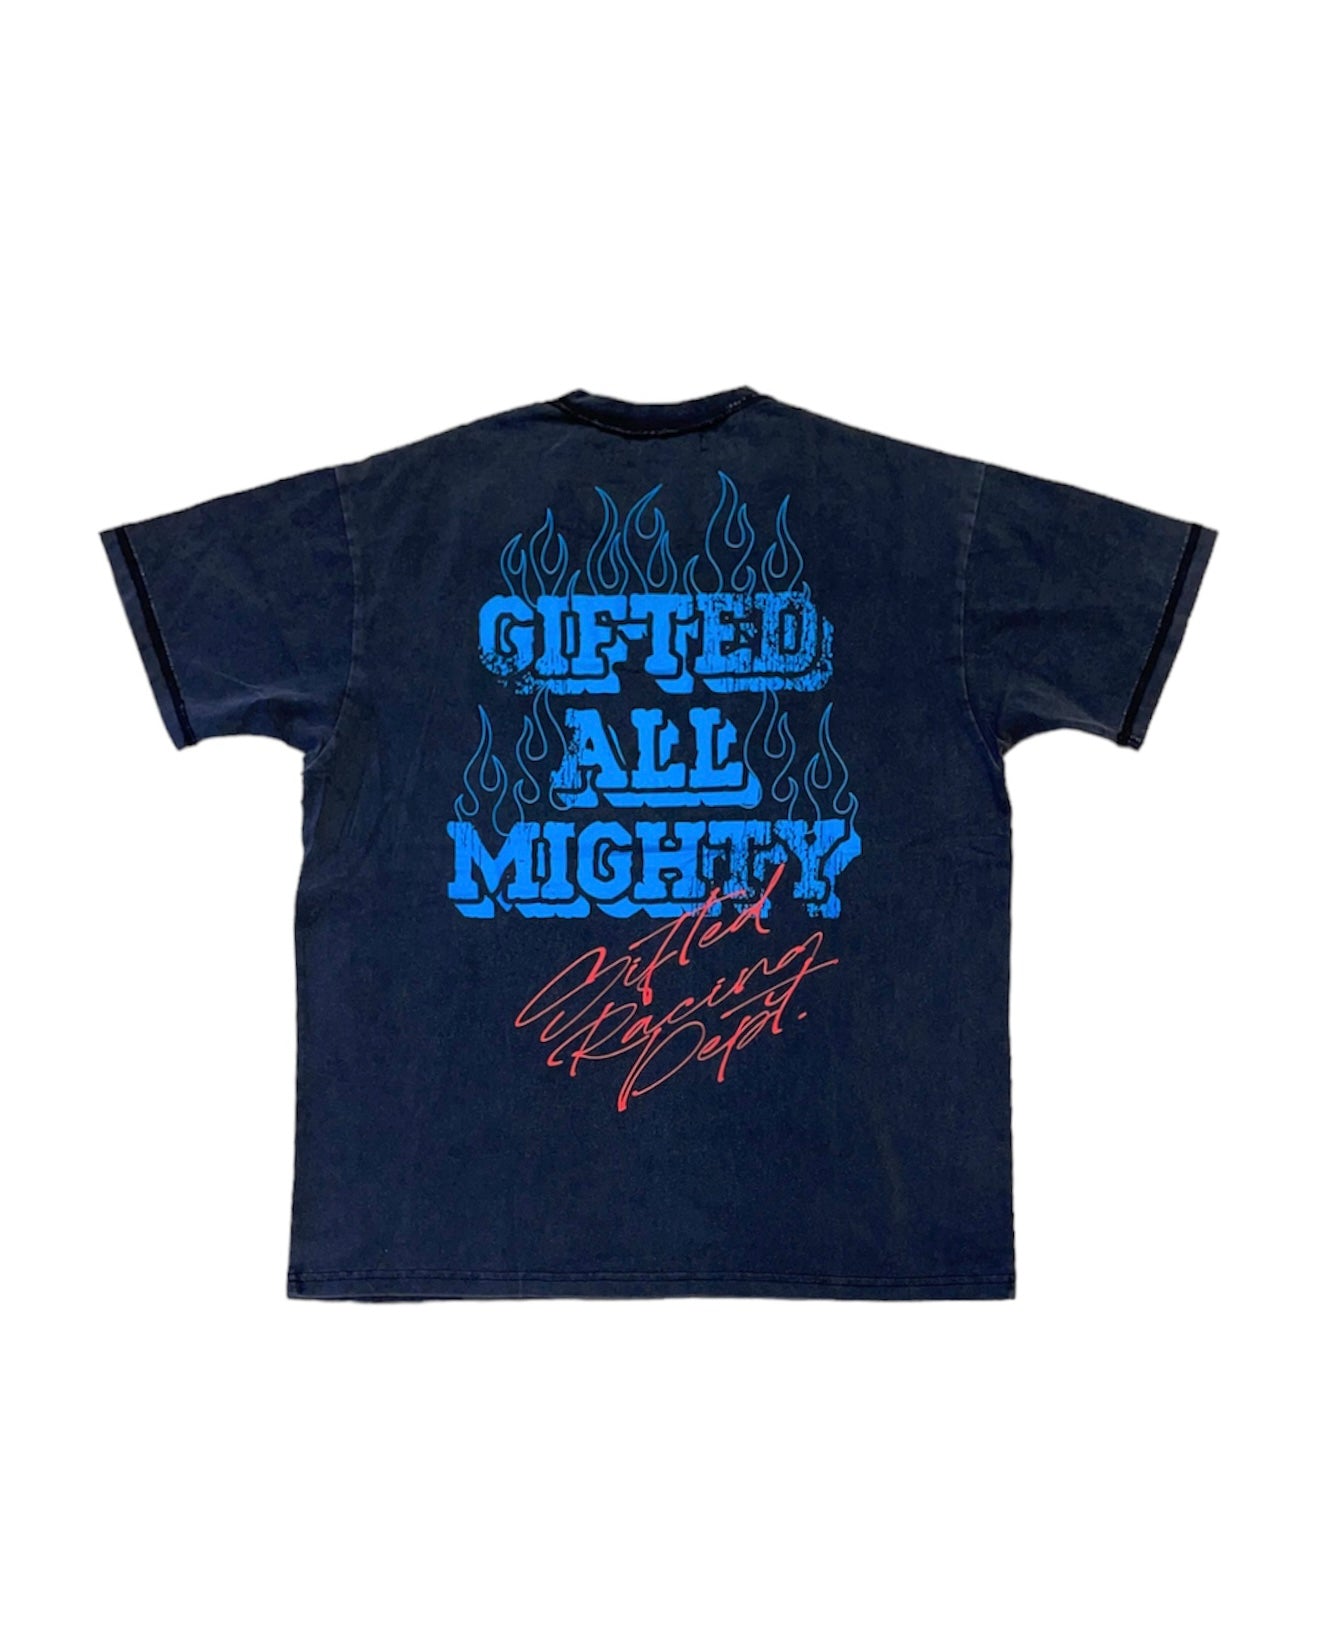 Gifted All Mighty Tee